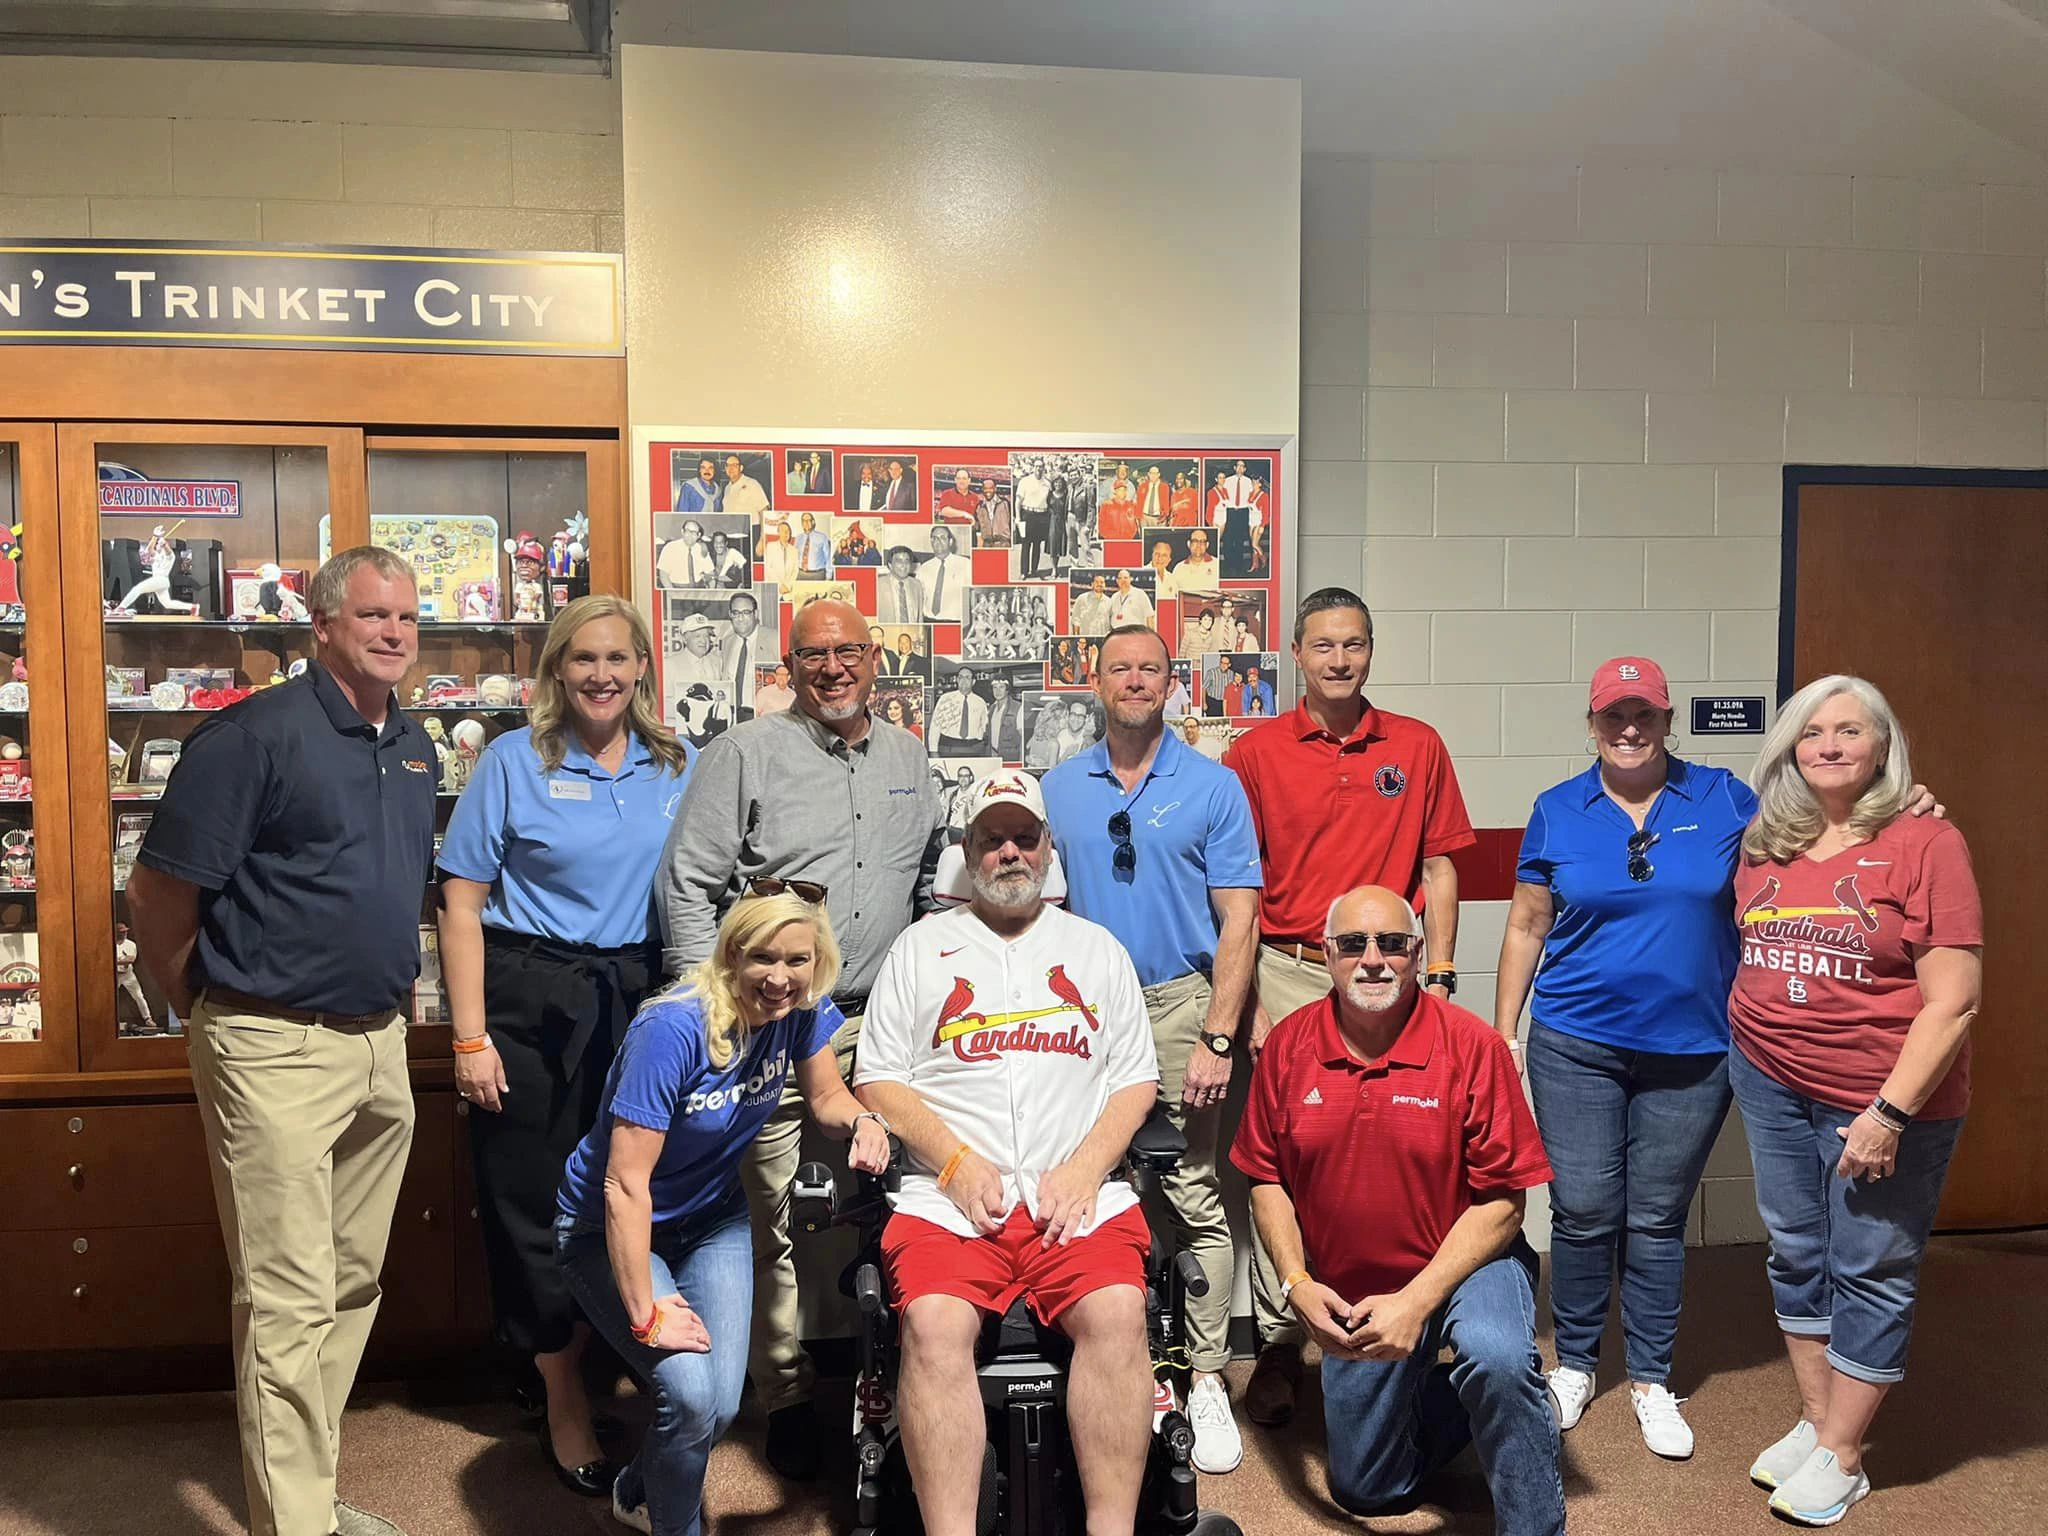 Group photo. At center former Permobil employee and person living  with ALS Alan Brown and Ashley Davis of the Permobil Foundation. Backstage at the Cardinals game